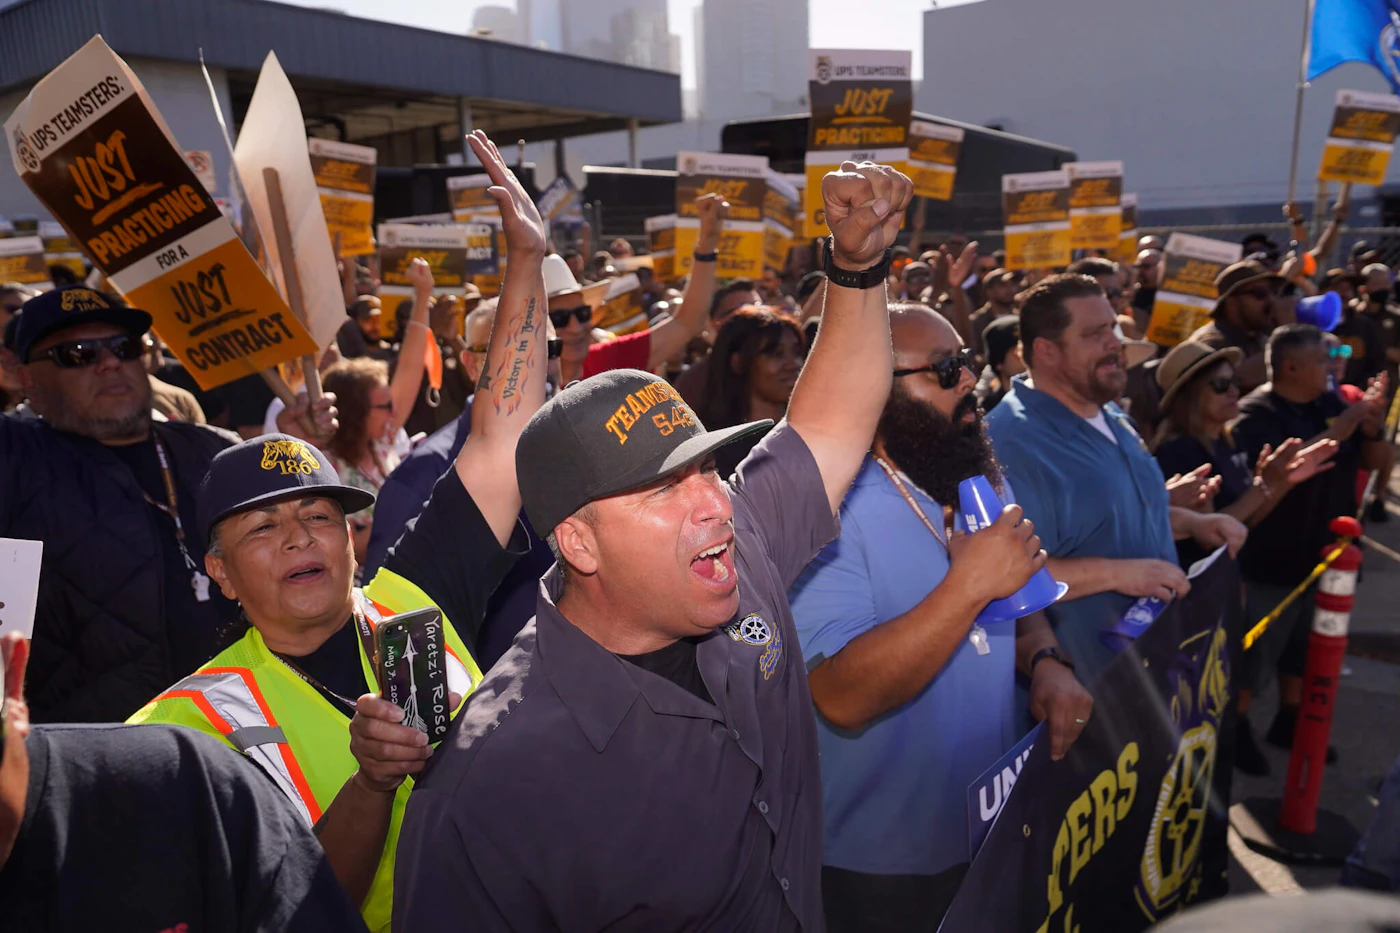 UPS teamsters and workers hold a rally in downtown Los Angeles, as a national strike deadline nears on Wednesday, July 19, 2023. A little more than a week after contract talks between United Parcel Service and the union representing 340,000 of its workers broke down, UPS said it will begin training nonunion employees in the U.S. to step in should there be a strike, which the union has vowed to do if no agreement is reached by the end of this month. (AP Photo/Damian Dovarganes)